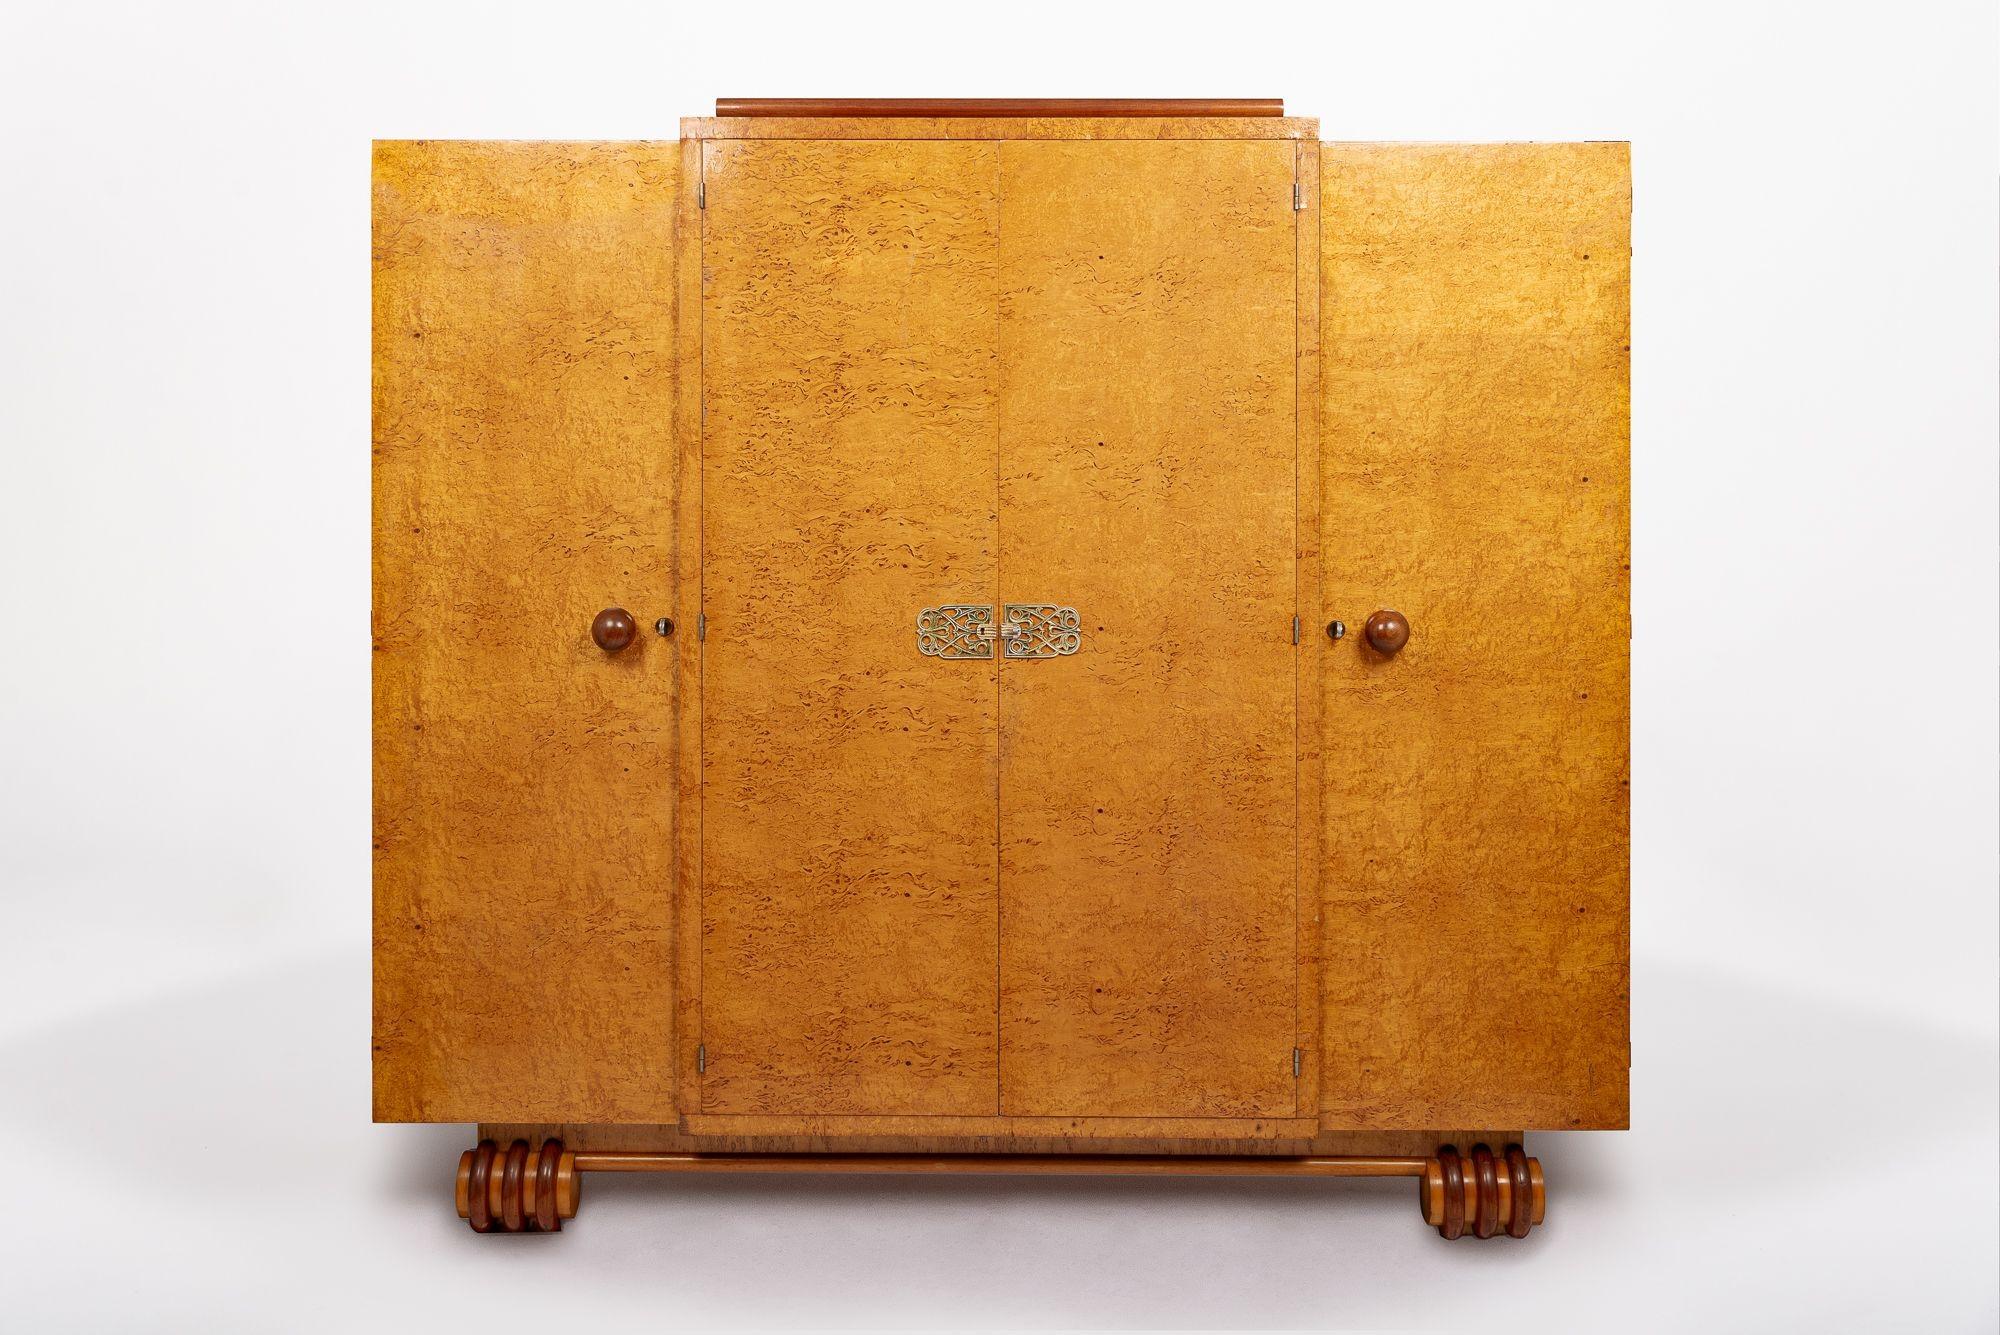 This incredible antique Art Deco wood linen cabinet or wardrobe cabinet is circa 1930. The cabinet is impeccably handcrafted from solid wood and Birdseye maple veneer with gorgeous grain patterning. The center double doors have full-length mirrors